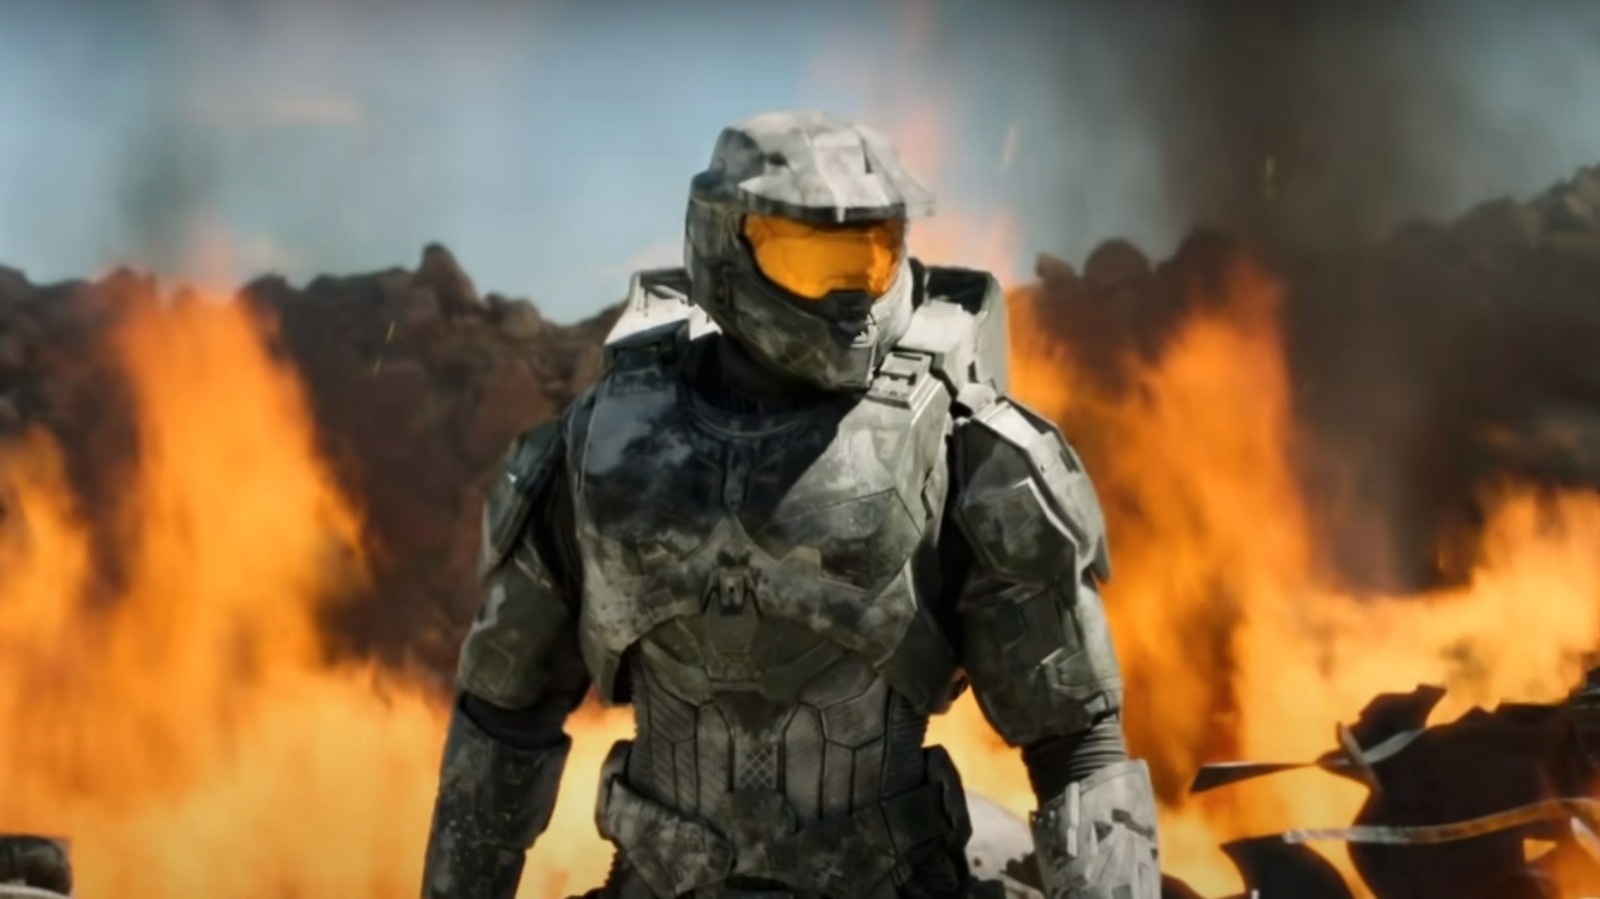 What Is The Song In The New Halo Trailer?